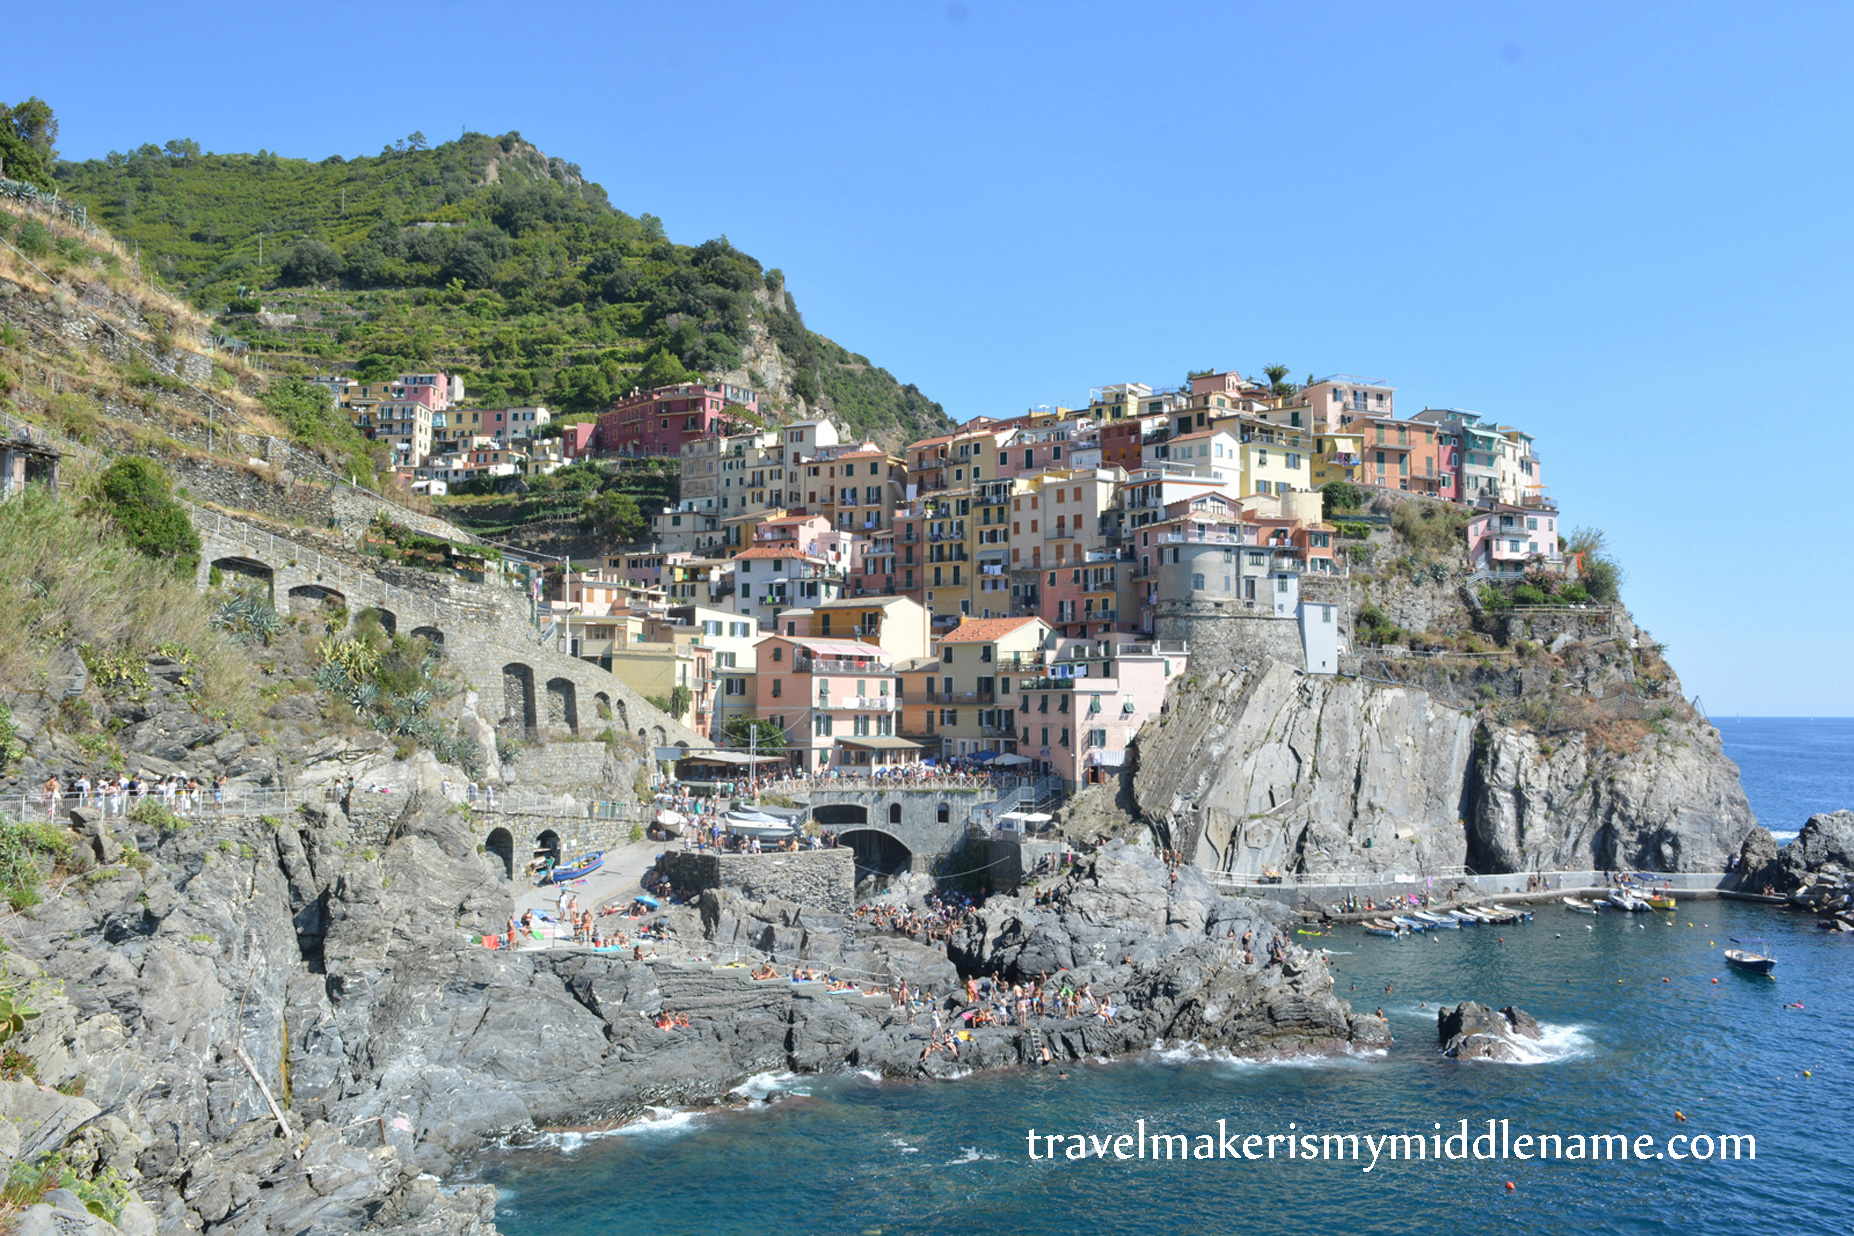 Cinque Terre, Italy: A practical guide for first-time visitors – where to stay, how to get there and what to expect